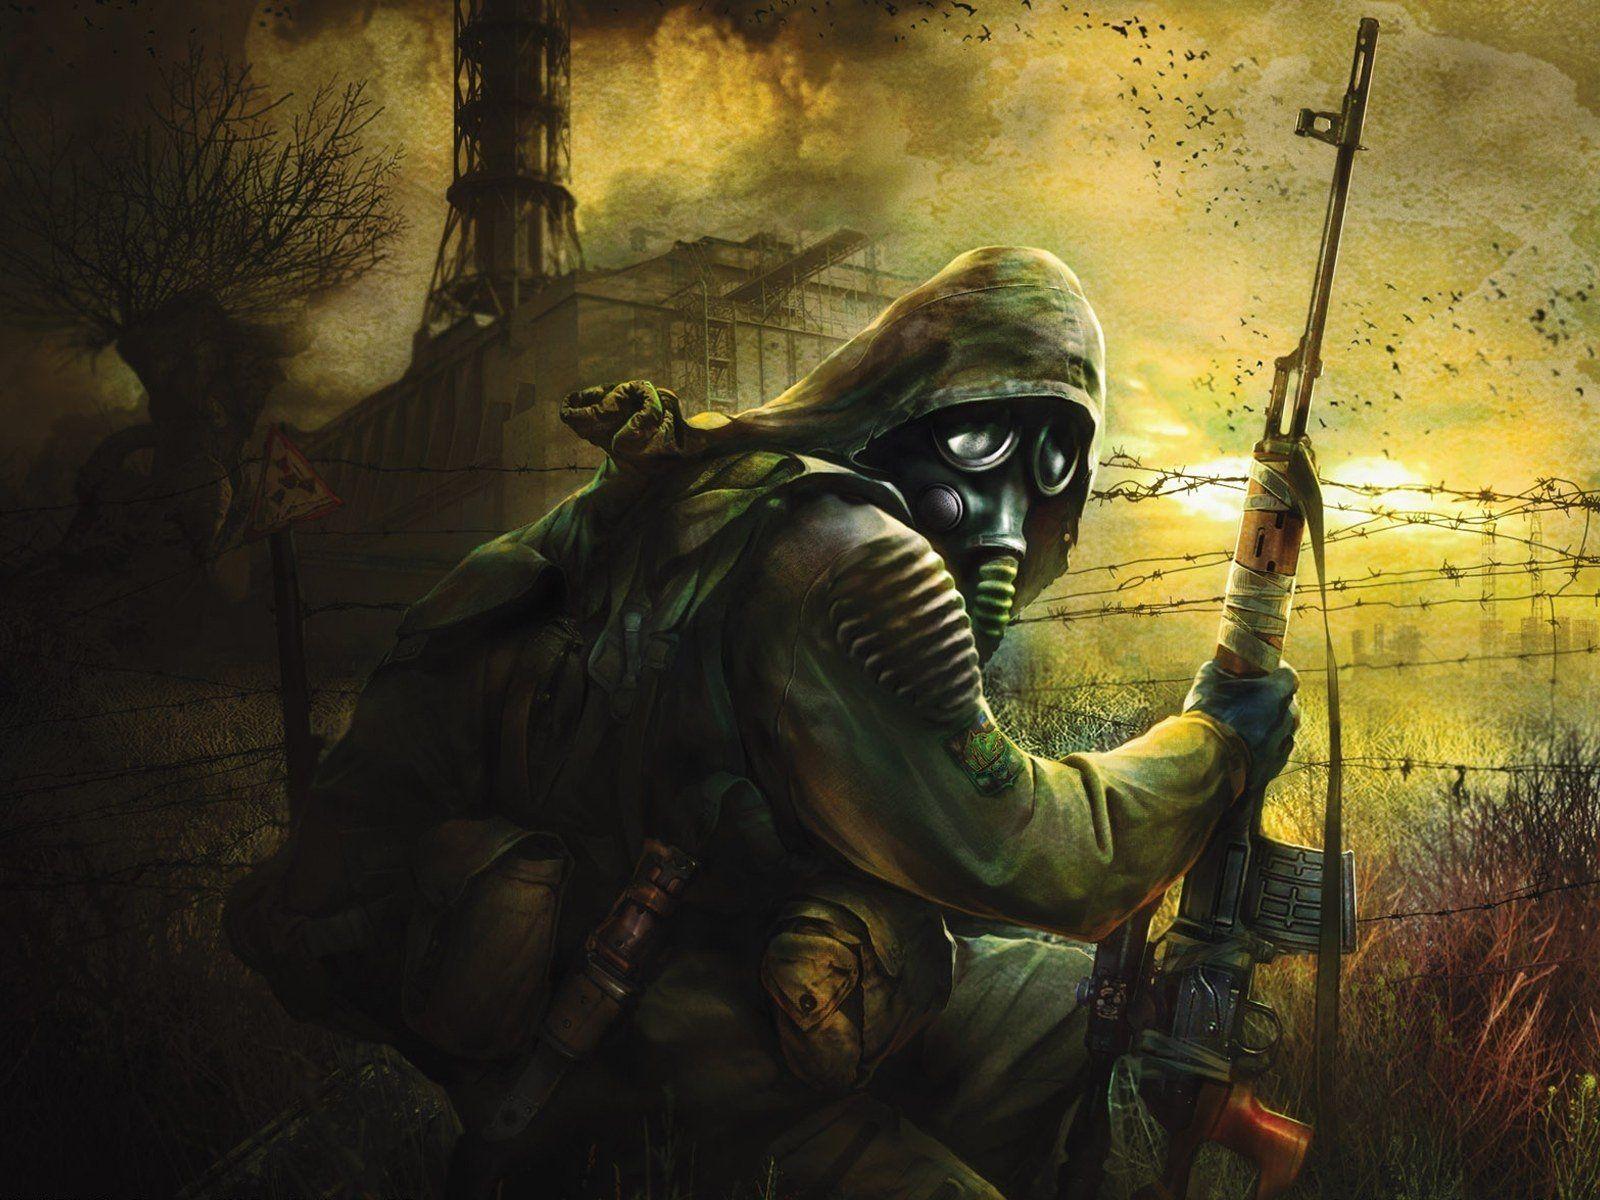 S.T.A.L.K.E.R.: Shadow of Chernobyl HD Wallpaper. Background